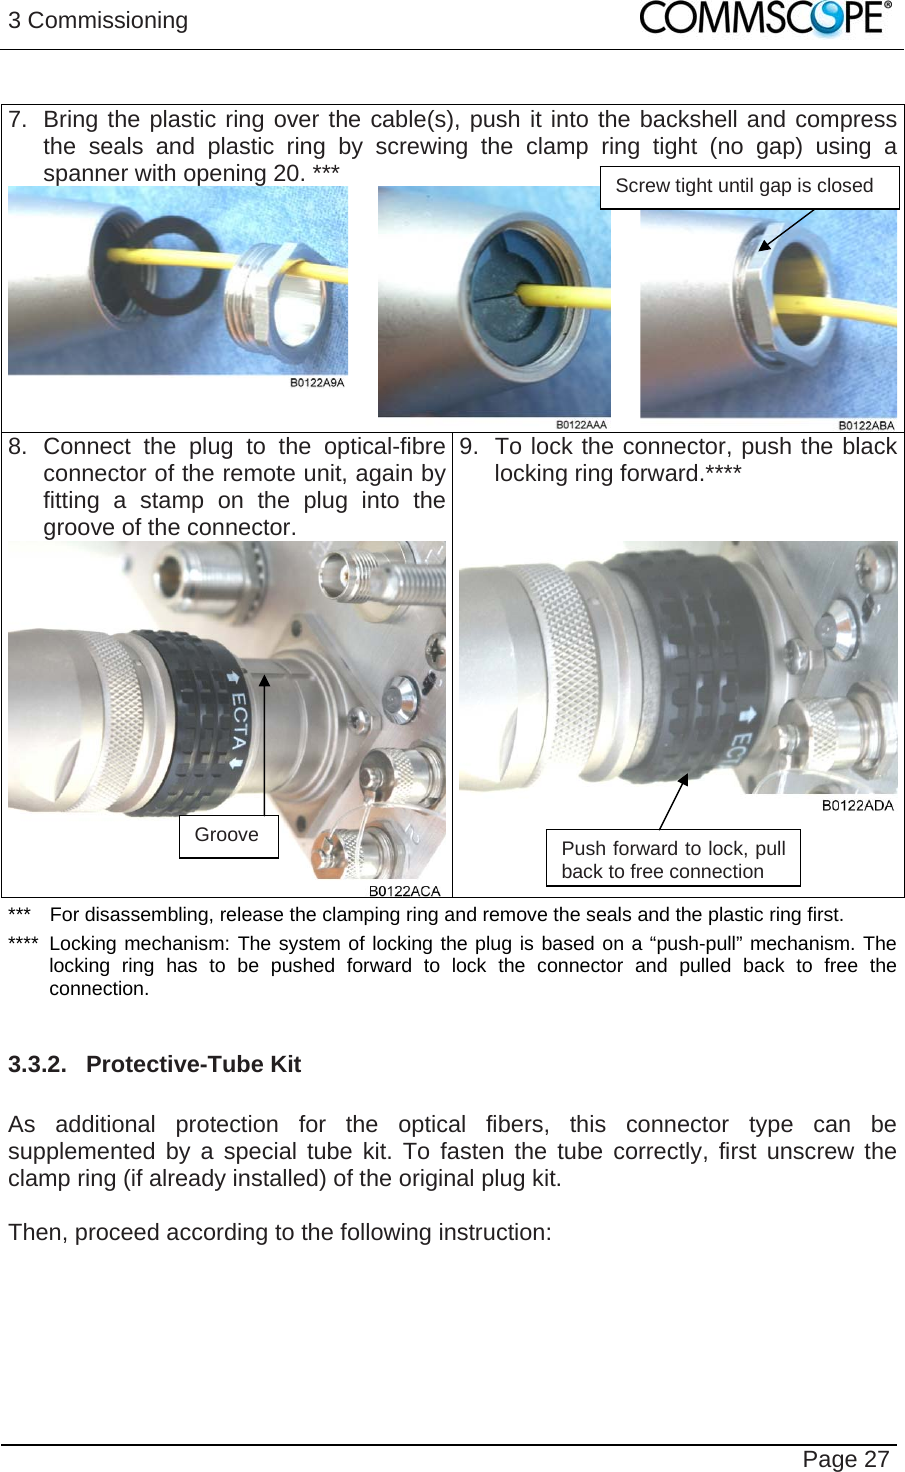 3 Commissioning   Page 27  7.  Bring the plastic ring over the cable(s), push it into the backshell and compress the seals and plastic ring by screwing the clamp ring tight (no gap) using a spanner with opening 20. *** 8. Connect the plug to the optical-fibre connector of the remote unit, again by fitting a stamp on the plug into the groove of the connector.  9.  To lock the connector, push the black locking ring forward.****  ***  For disassembling, release the clamping ring and remove the seals and the plastic ring first. ****  Locking mechanism: The system of locking the plug is based on a “push-pull” mechanism. The locking ring has to be pushed forward to lock the connector and pulled back to free the connection.  3.3.2. Protective-Tube Kit  As additional protection for the optical fibers, this connector type can be supplemented by a special tube kit. To fasten the tube correctly, first unscrew the clamp ring (if already installed) of the original plug kit.   Then, proceed according to the following instruction:  Groove  Push forward to lock, pull back to free connection Screw tight until gap is closed 